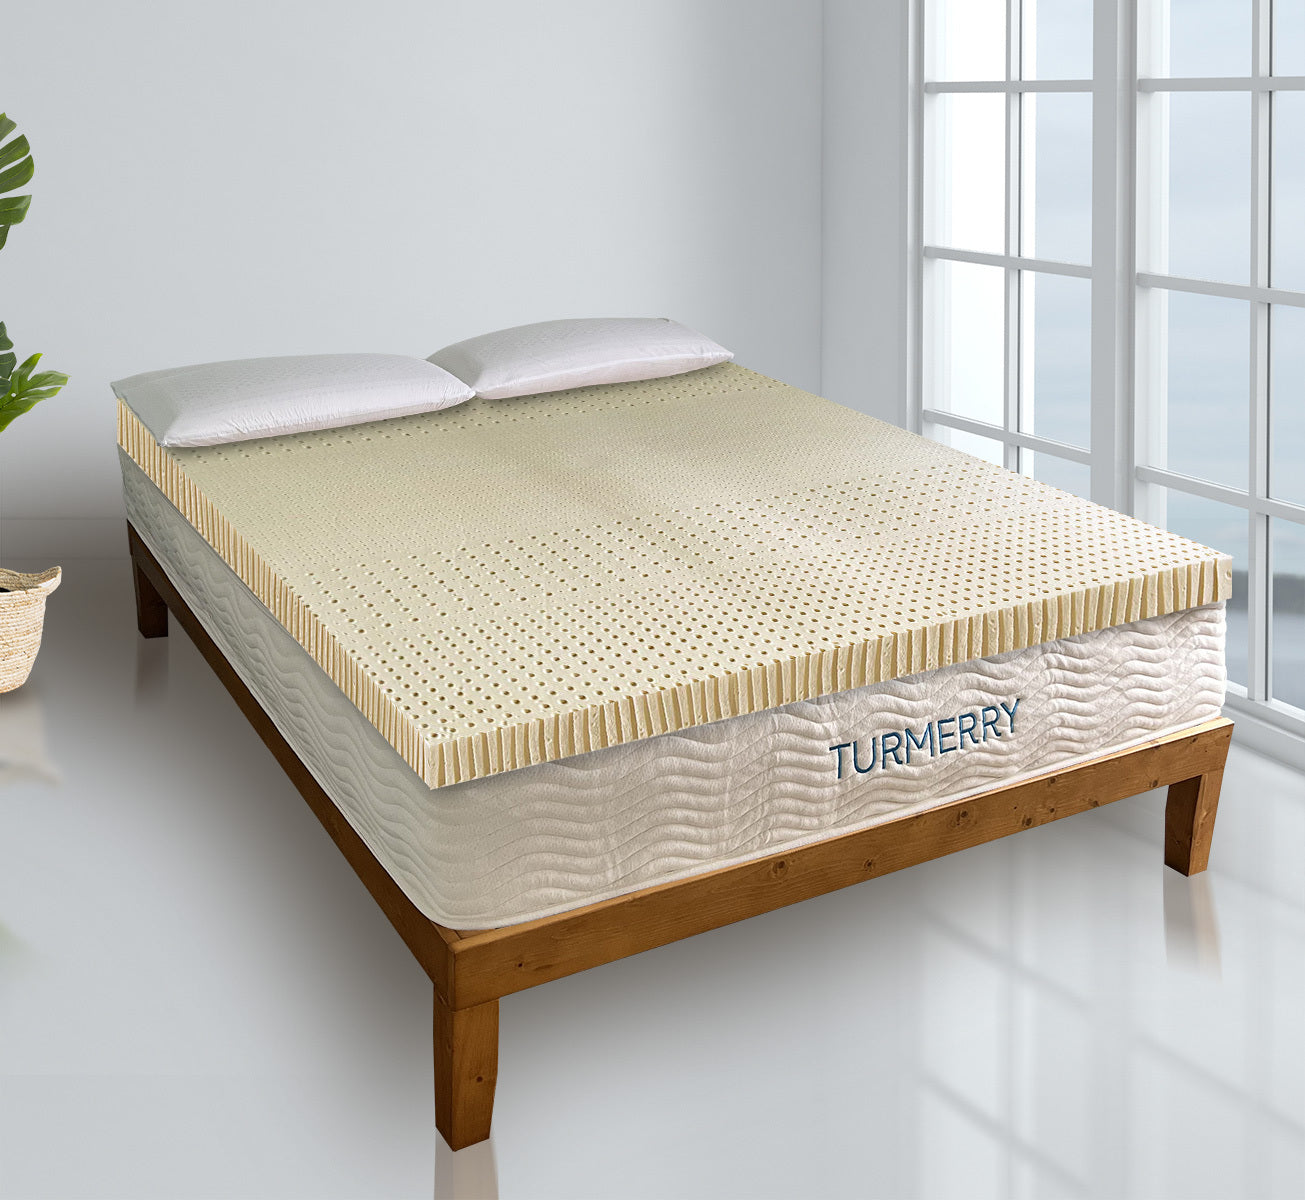 What Are The Measurements For A Full Size Mattress